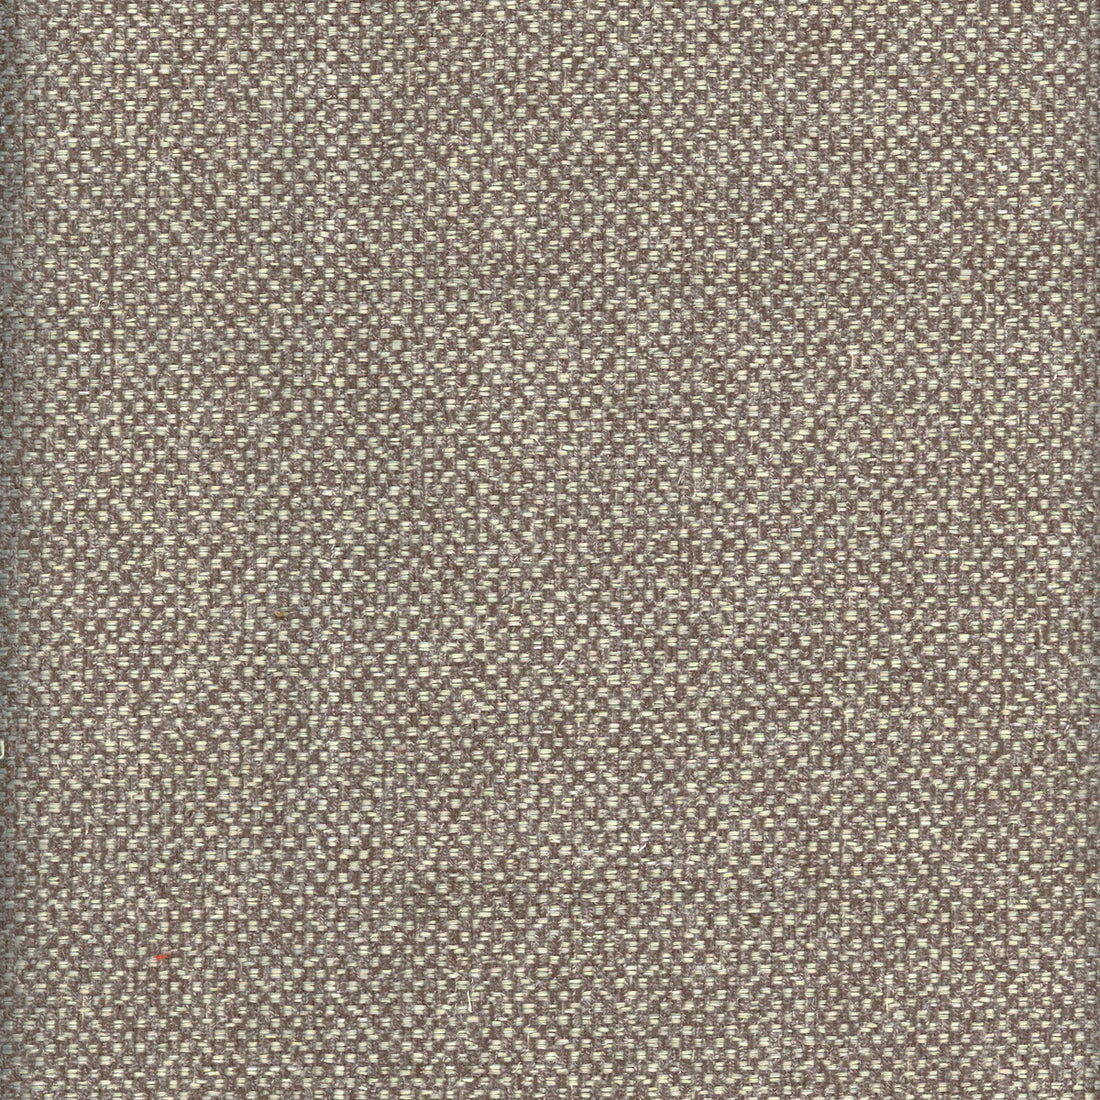 Yosemite fabric in shale color - pattern AM100332.106.0 - by Kravet Couture in the Andrew Martin Canyon collection